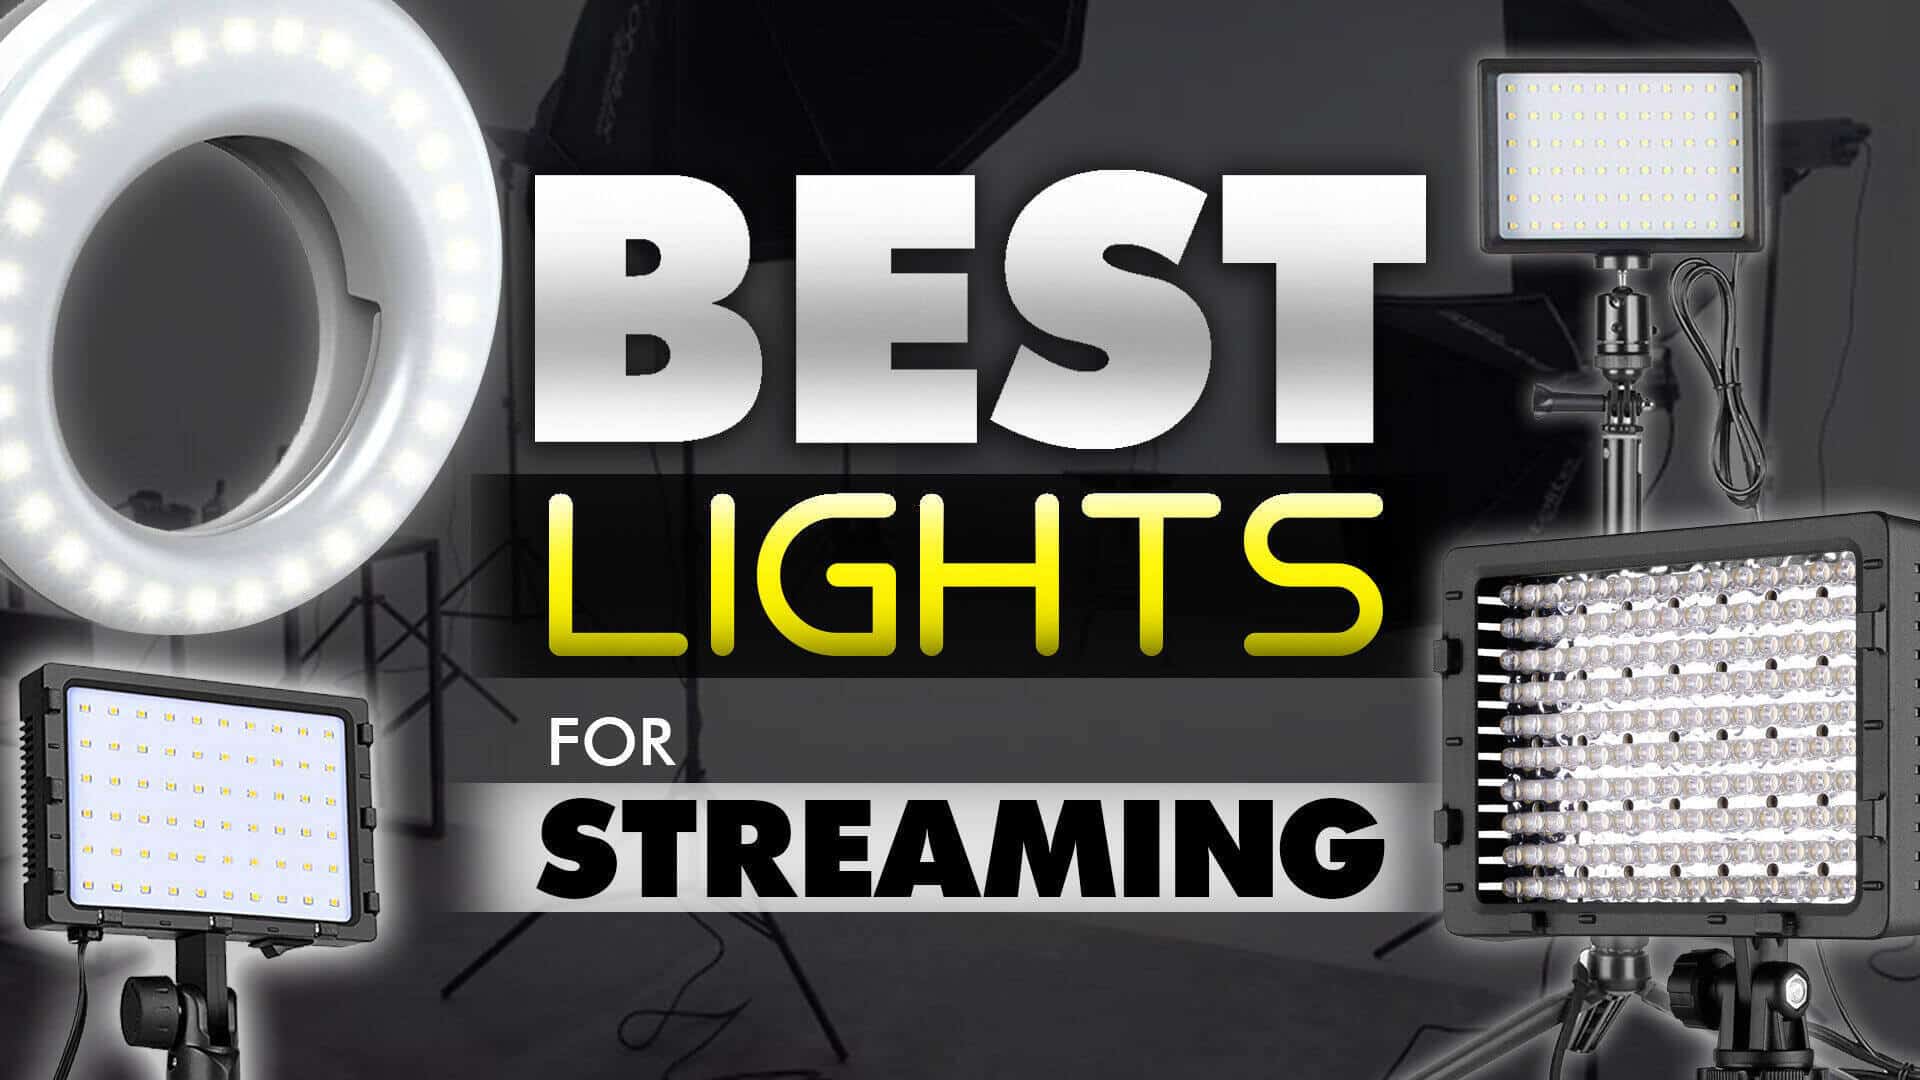 The Best Lighting for Streaming on Twitch